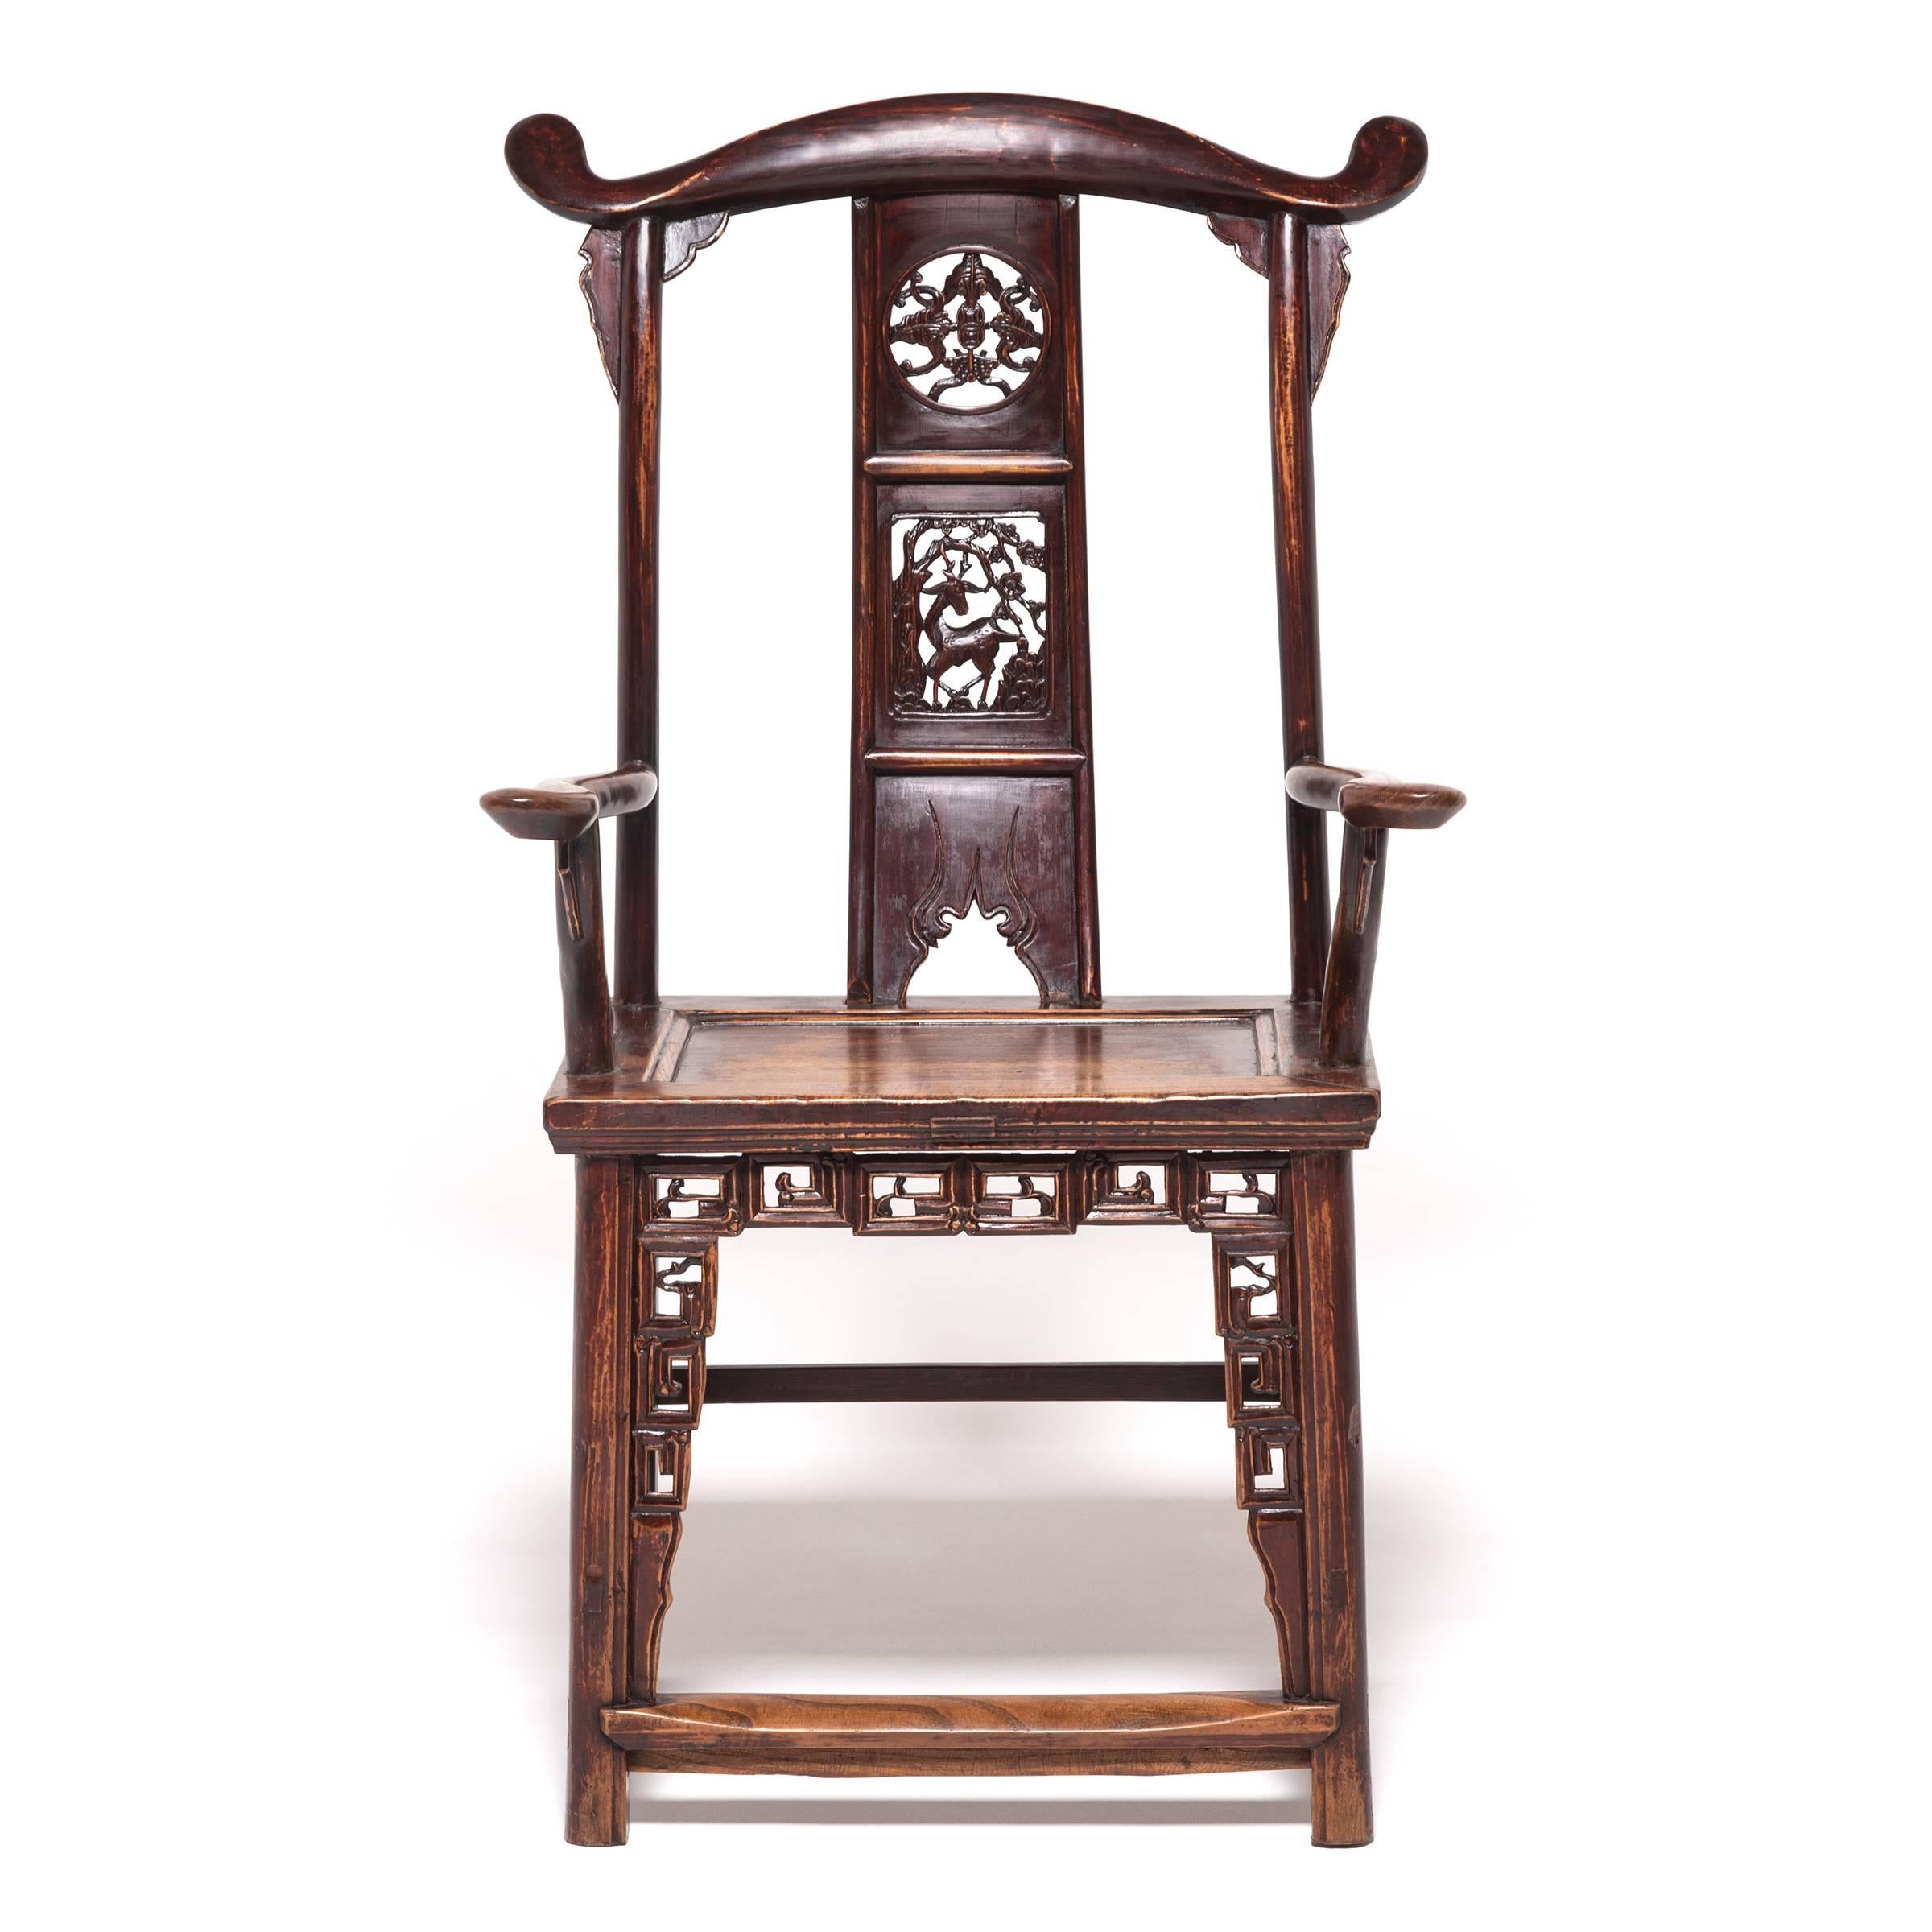 These distinctive 19th century tall back chairs were constructed with 